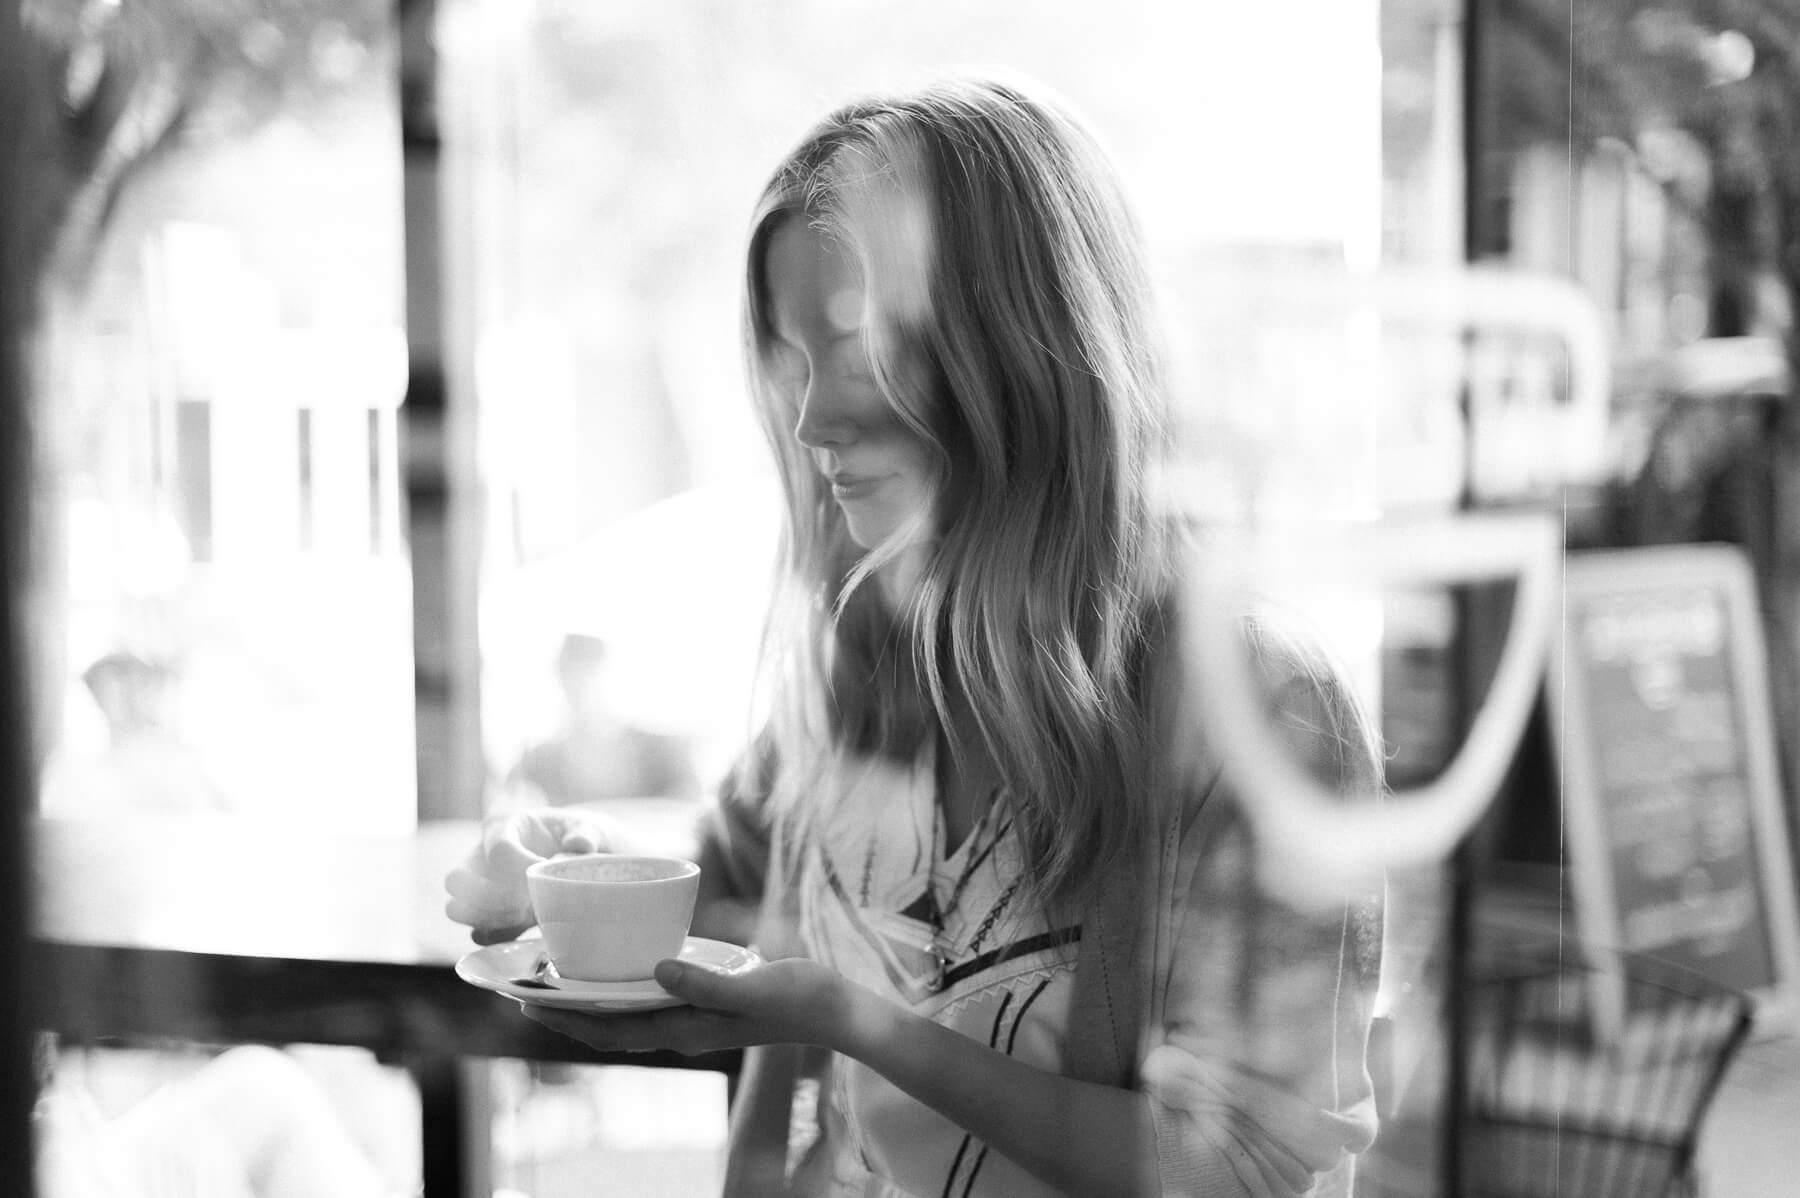 Claire Coffee sipping a drink at Barista in Portland, Oregon. Photo by Portland Portrait Photographer Briana Morrison